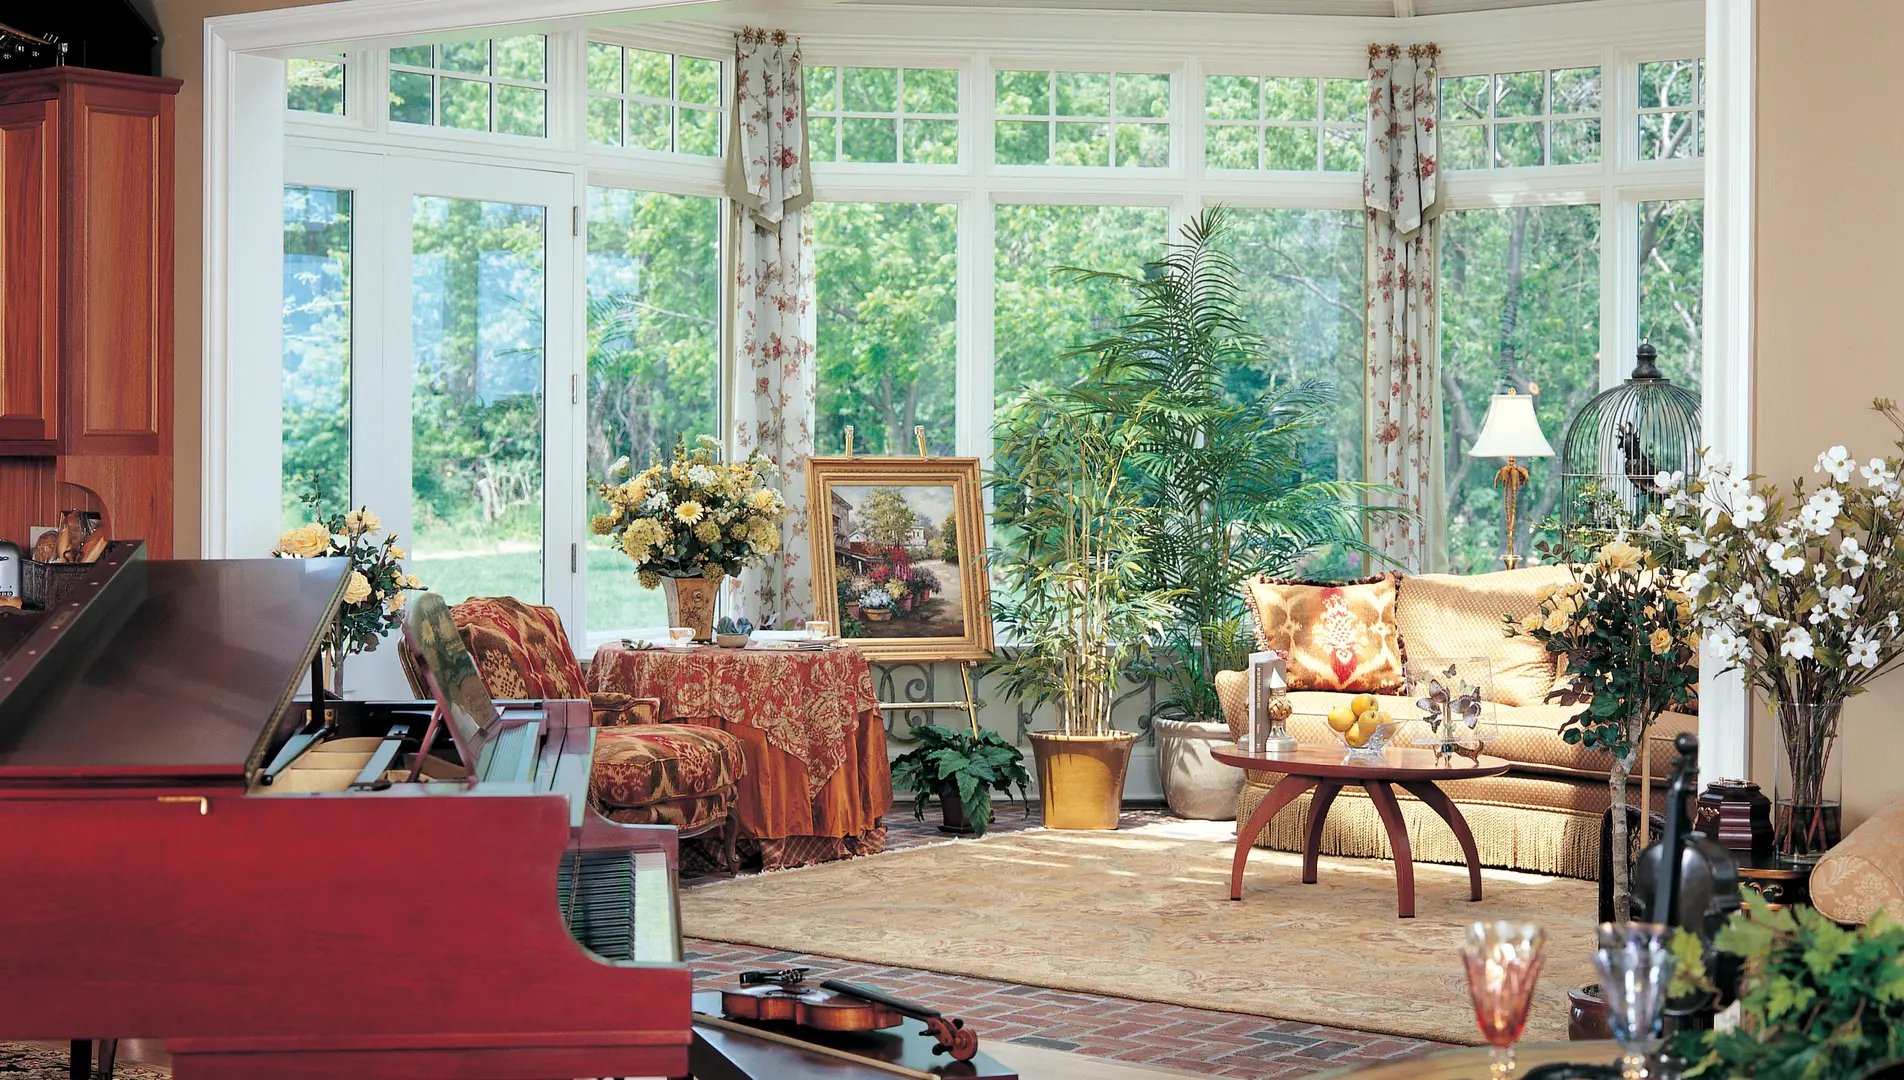 A living room with many windows and furniture.